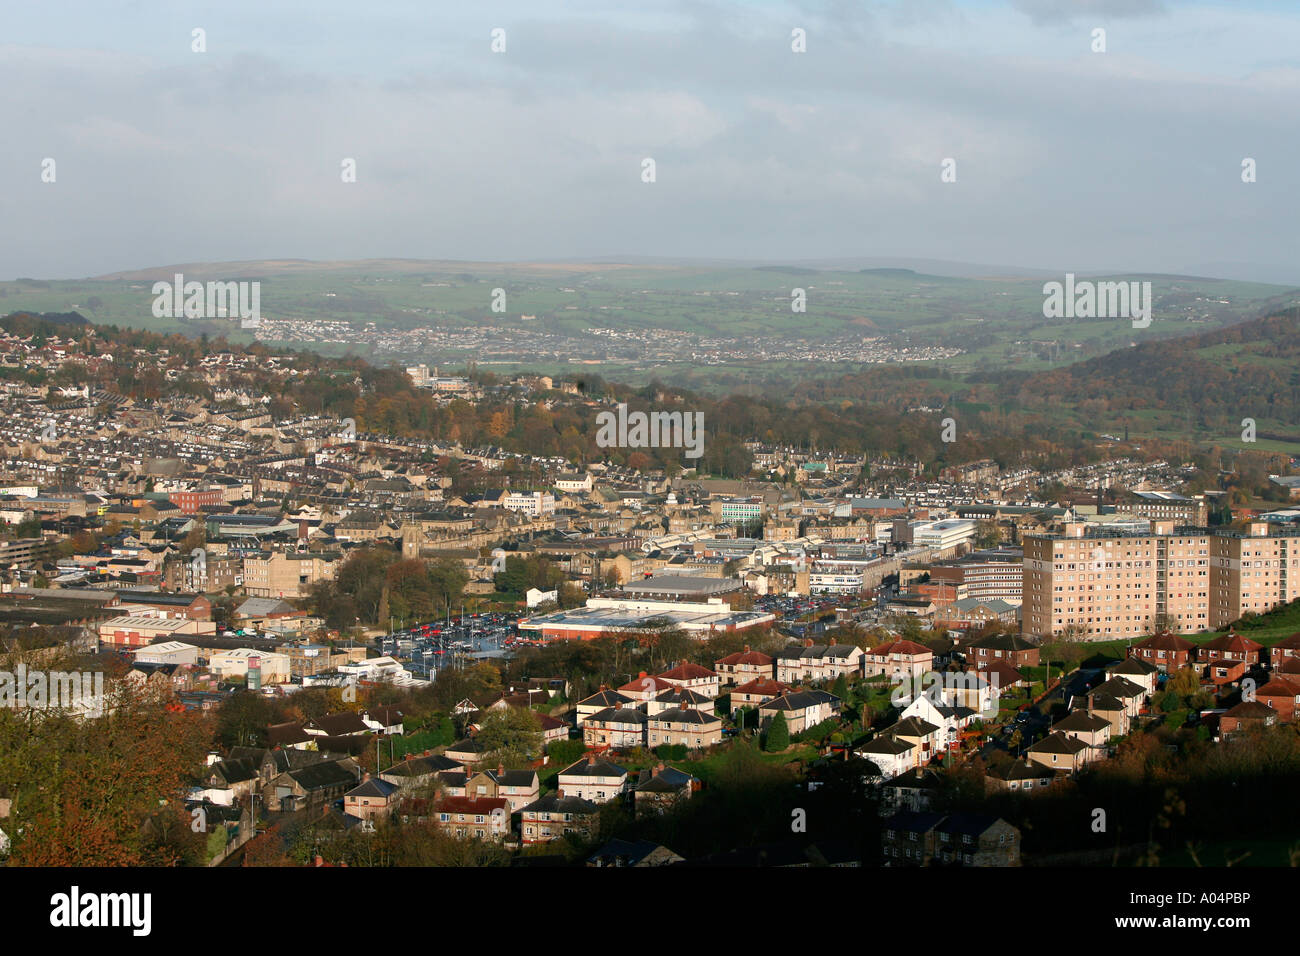 A view of Keighley, West Yorkshire, from one of the surrounding hills Stock Photo